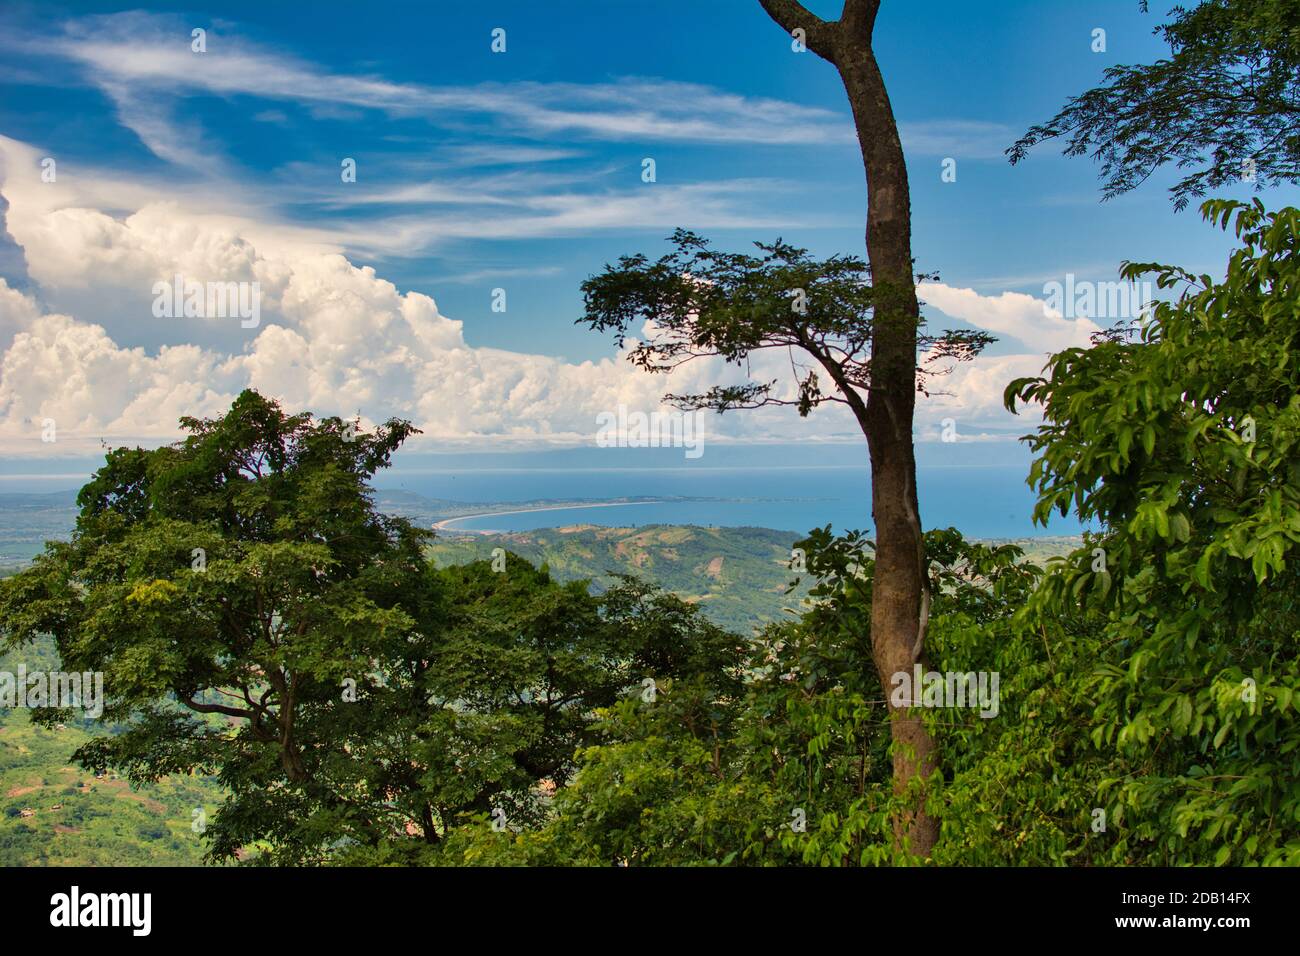 Shining bandage imperium Landscape view on Lake Malawi, as seen on the road S103 to Livingstonia,  Malawi, Africa. Beauty in nature. Travel and tourism Stock Photo - Alamy